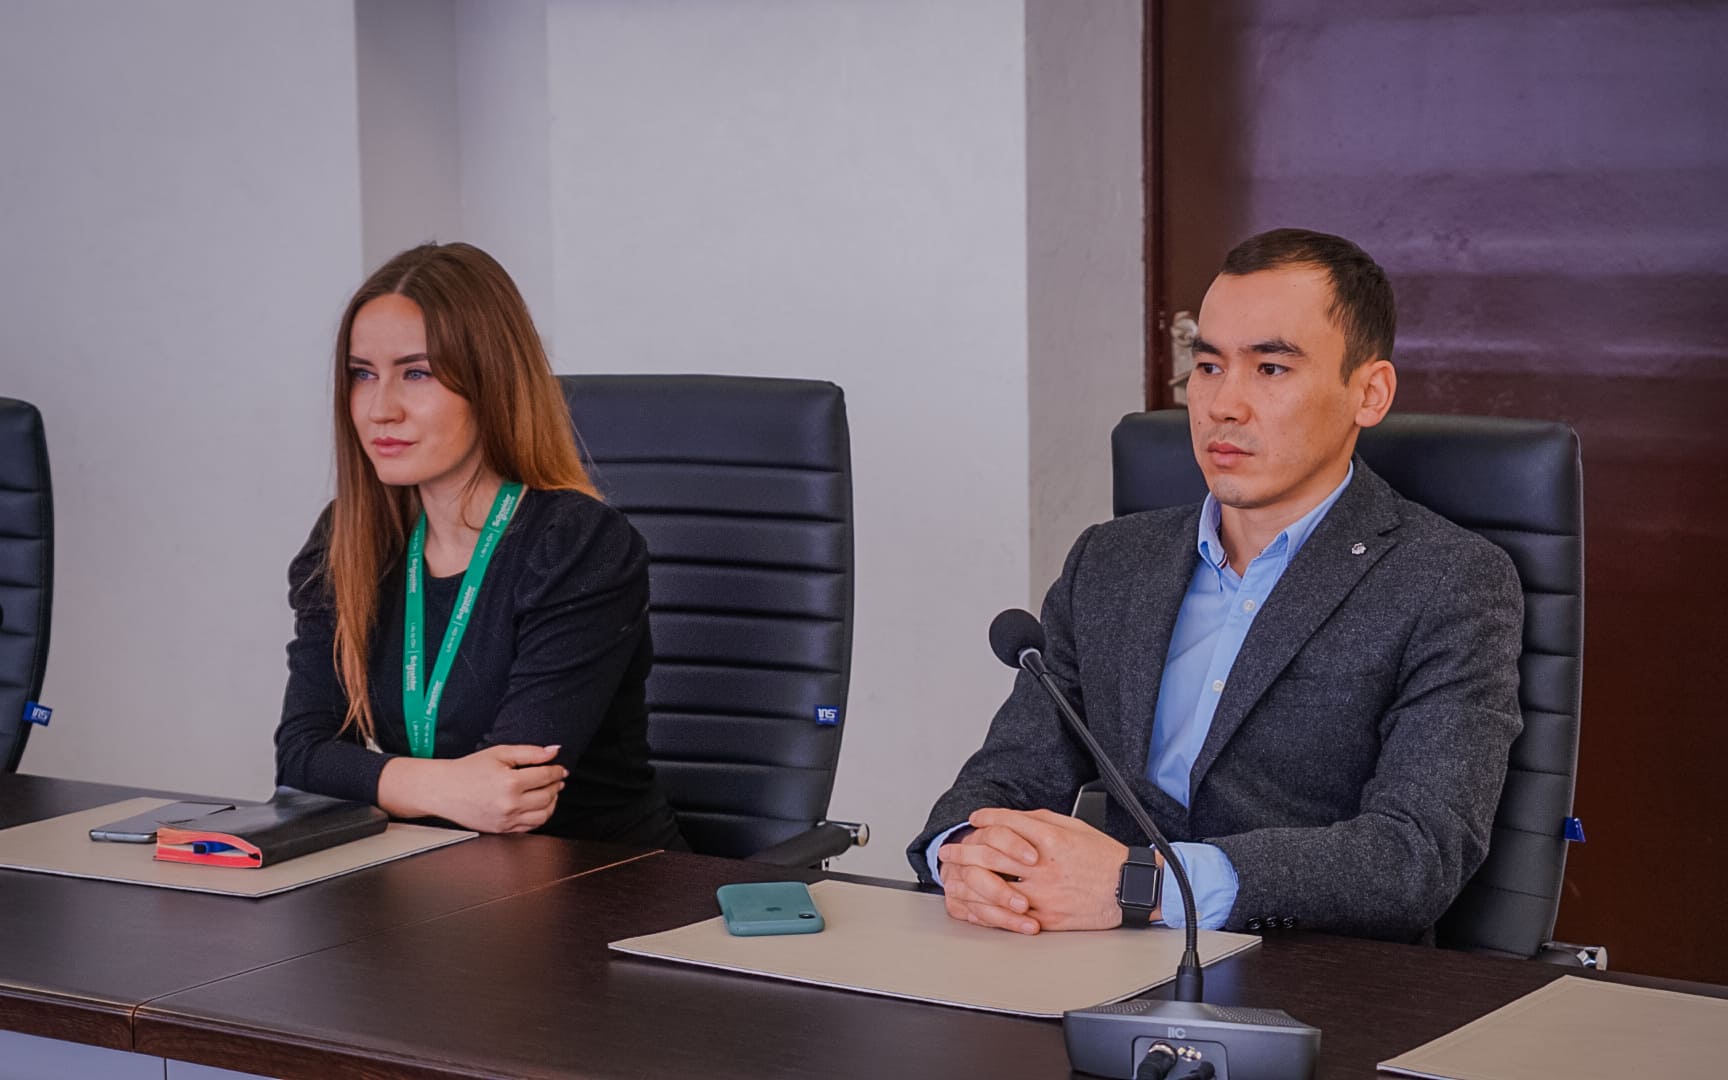 The meeting with representatives of the company 